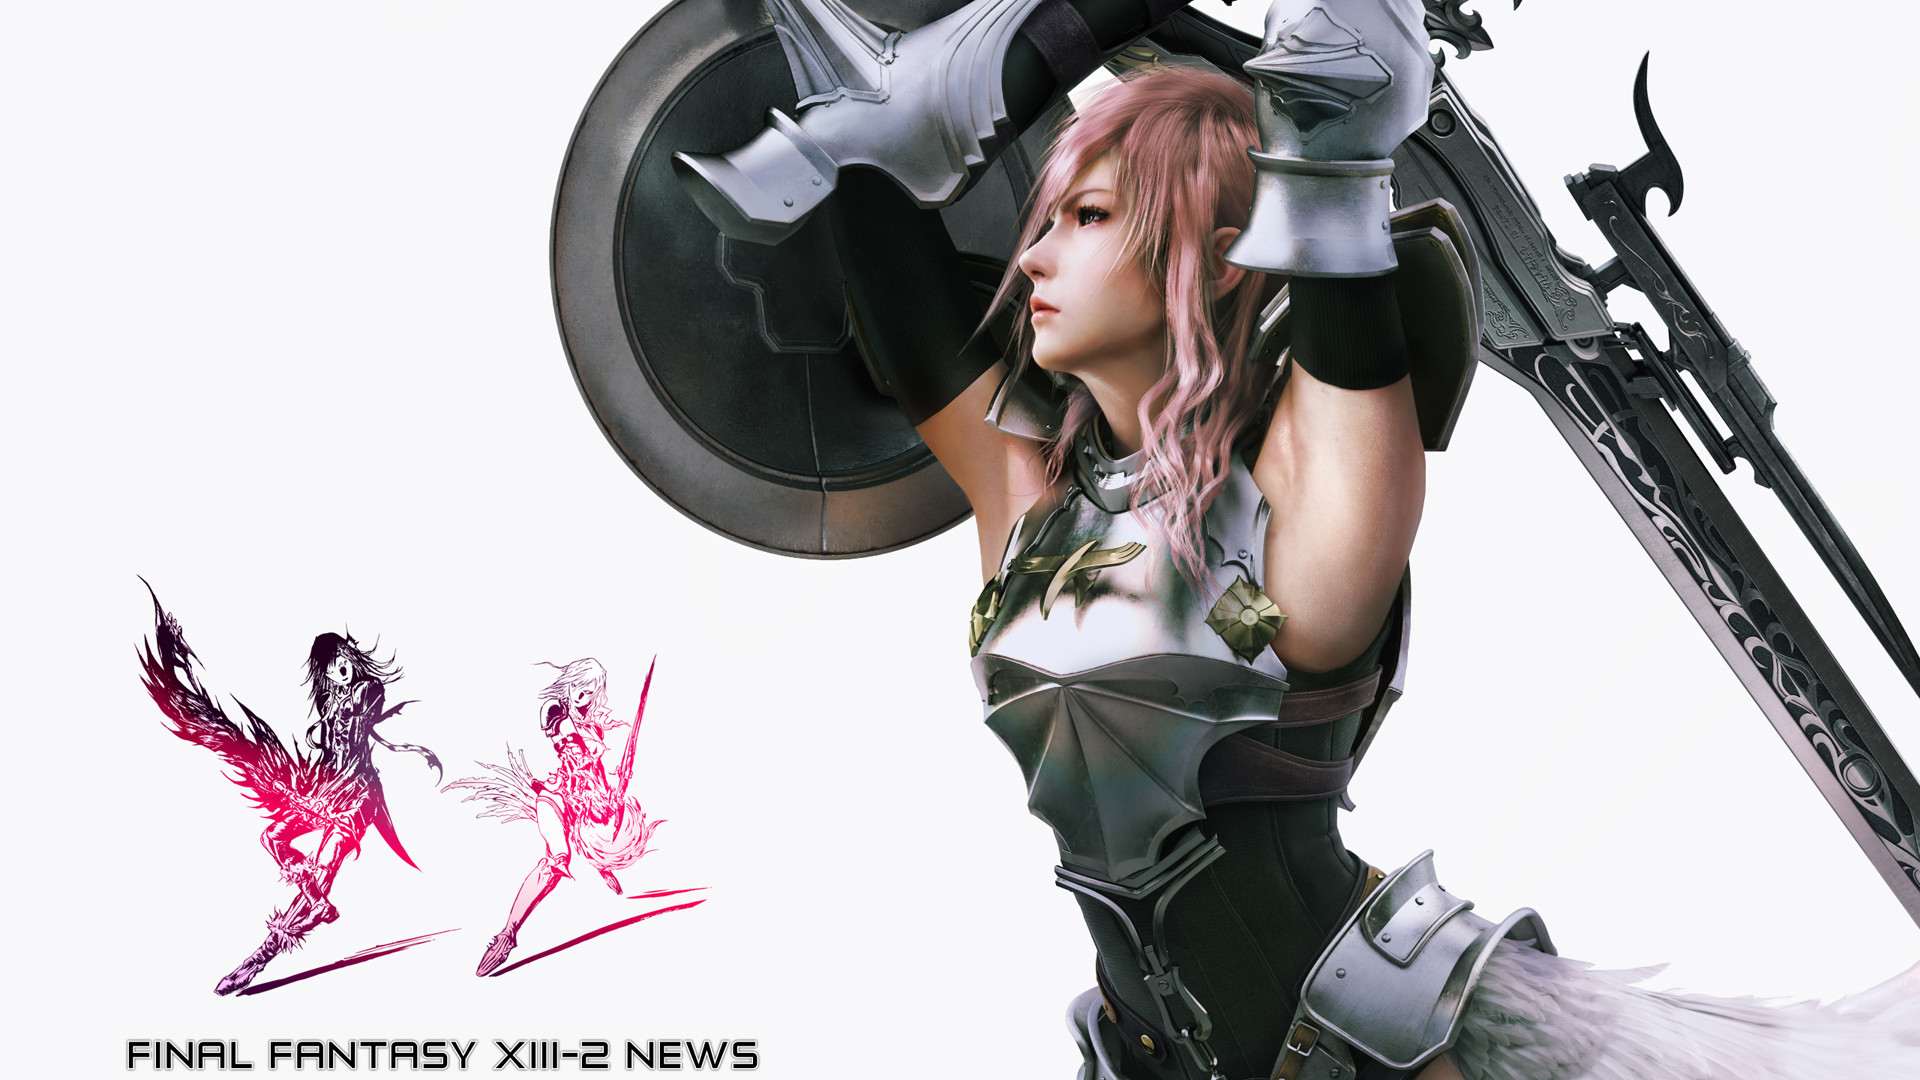 1920x1080 Get Your Final Fantasy XIII-2 News Wallpaper From Here!